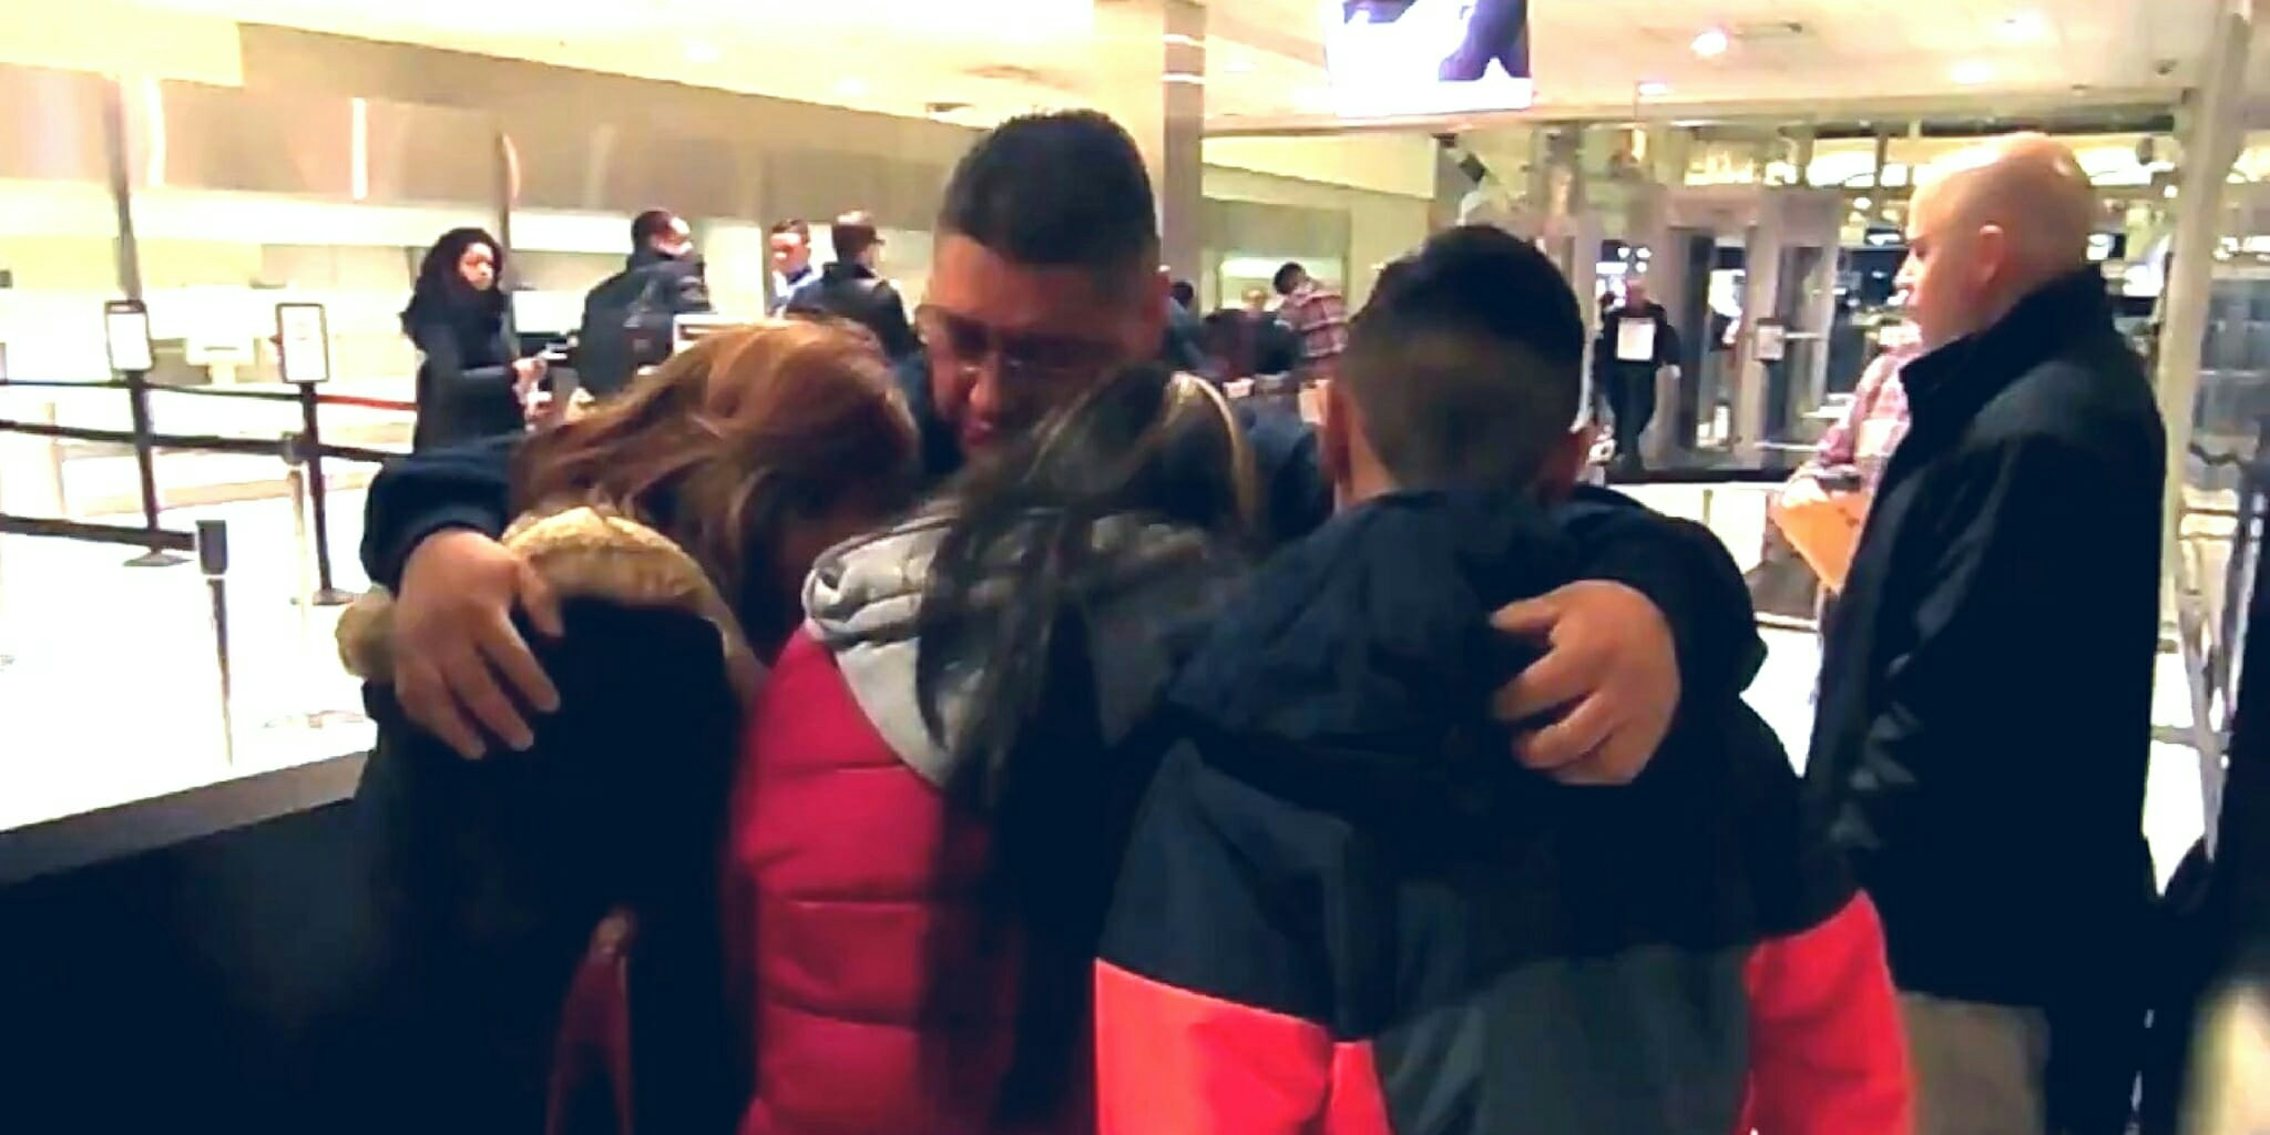 Detriot father Jorge Garcia hugs his family before he's deported to Mexico after living in the U.S. for 30 years.